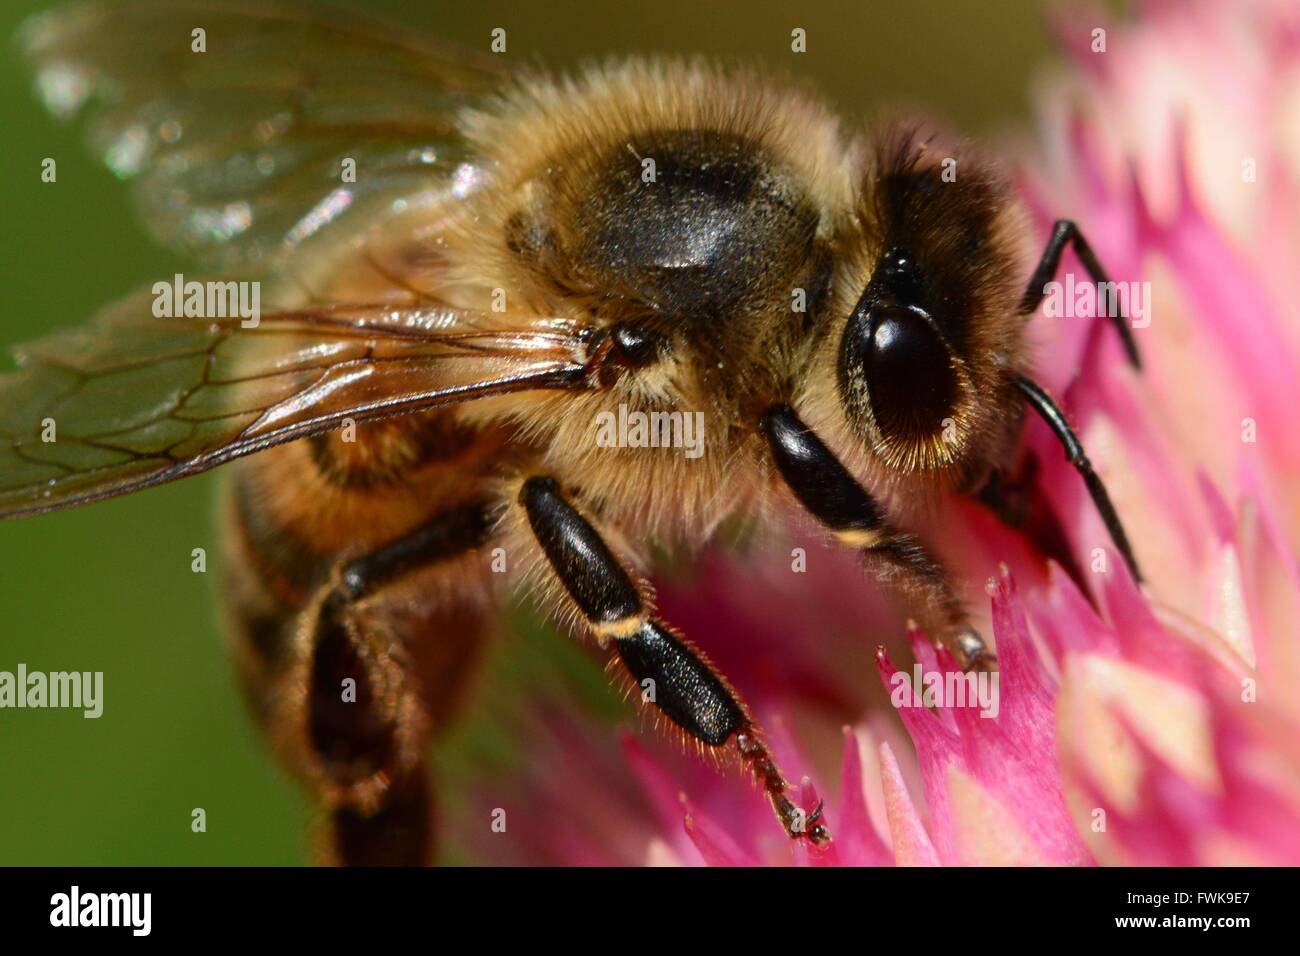 Close-Up Of Bee On Flower Outdoors Stock Photo